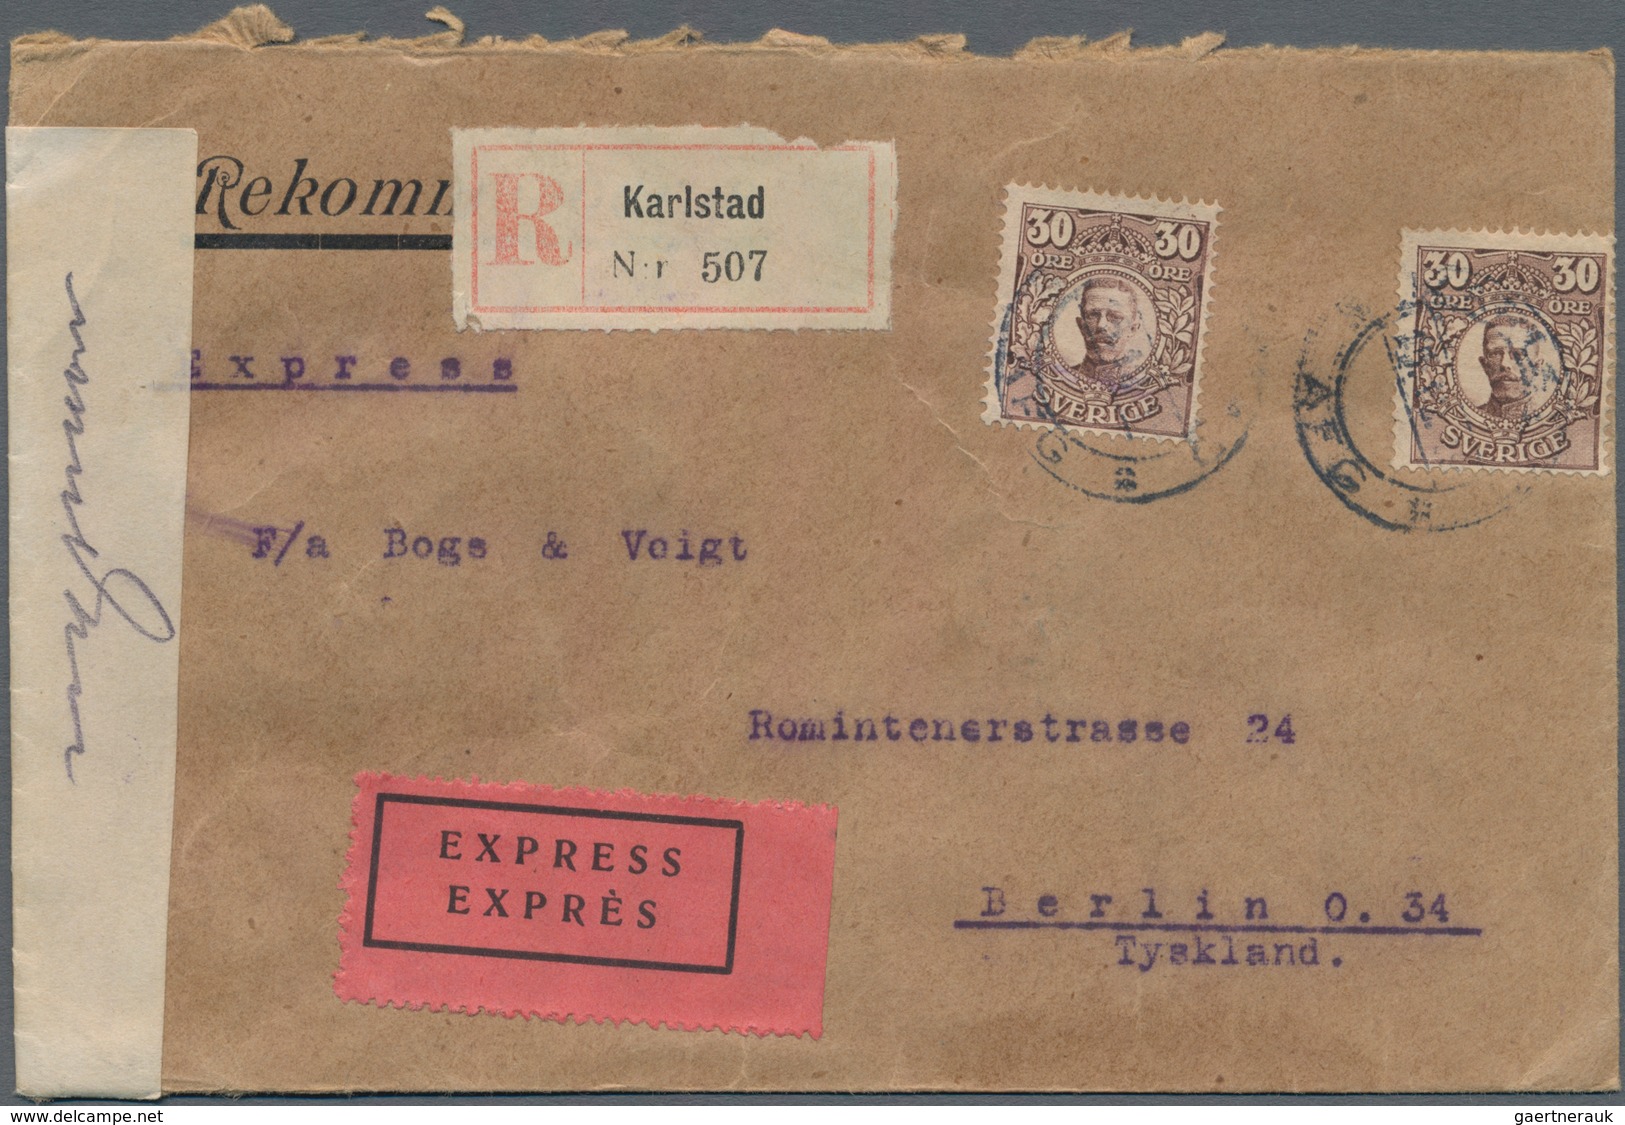 Europa: 1895/1950 (ca.), Turkey, Greece, Sweden, England Ec. Covers (ca. 37, Inc. Some Uprated Stati - Europe (Other)